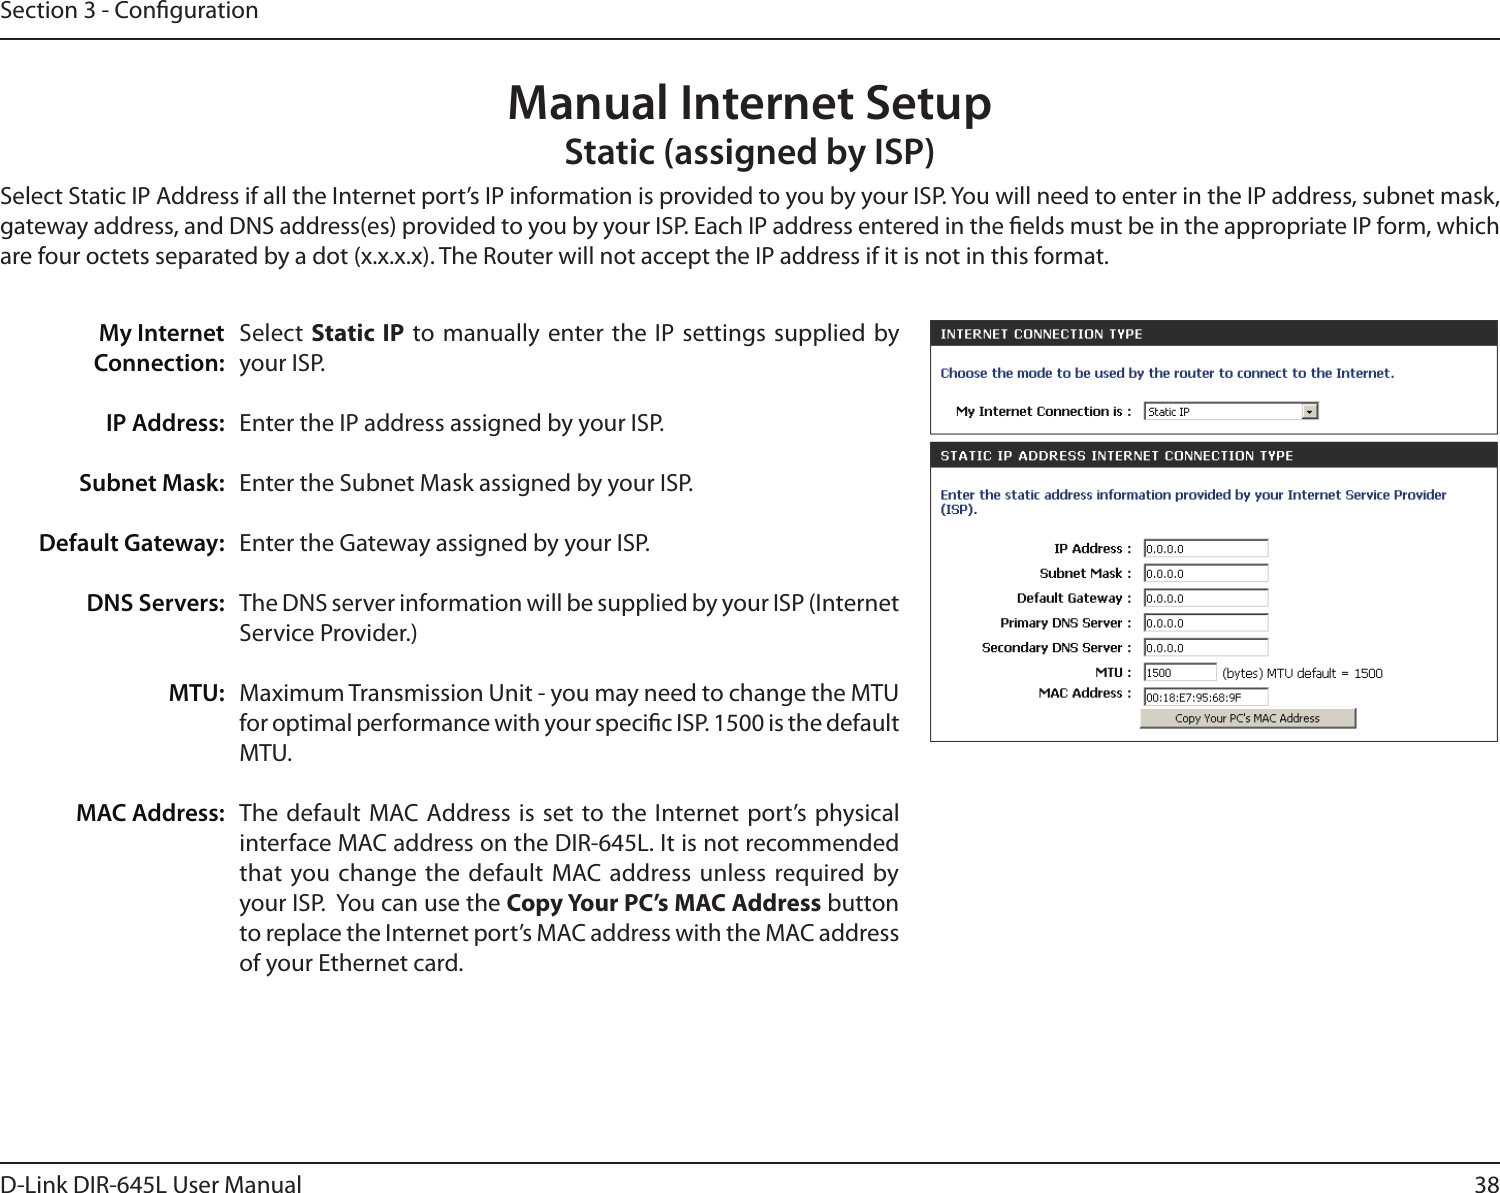 38D-Link DIR-645L User ManualSection 3 - CongurationSelect  Static IP to manually enter the IP settings supplied by your ISP.Enter the IP address assigned by your ISP.Enter the Subnet Mask assigned by your ISP.Enter the Gateway assigned by your ISP.The DNS server information will be supplied by your ISP (Internet Service Provider.)Maximum Transmission Unit - you may need to change the MTU for optimal performance with your specic ISP. 1500 is the default MTU.The default MAC Address is set to the Internet port’s  physical interface MAC address on the DIR-645L. It is not recommended that you change  the default  MAC address unless required by your ISP.  You can use the Copy Your PC’s MAC Address button to replace the Internet port’s MAC address with the MAC address of your Ethernet card.My InternetConnection:IP Address:Subnet Mask:Default Gateway:DNS Servers:MTU:MAC Address:Manual Internet SetupStatic (assigned by ISP)Select Static IP Address if all the Internet port’s IP information is provided to you by your ISP. You will need to enter in the IP address, subnet mask, gateway address, and DNS address(es) provided to you by your ISP. Each IP address entered in the elds must be in the appropriate IP form, which are four octets separated by a dot (x.x.x.x). The Router will not accept the IP address if it is not in this format.